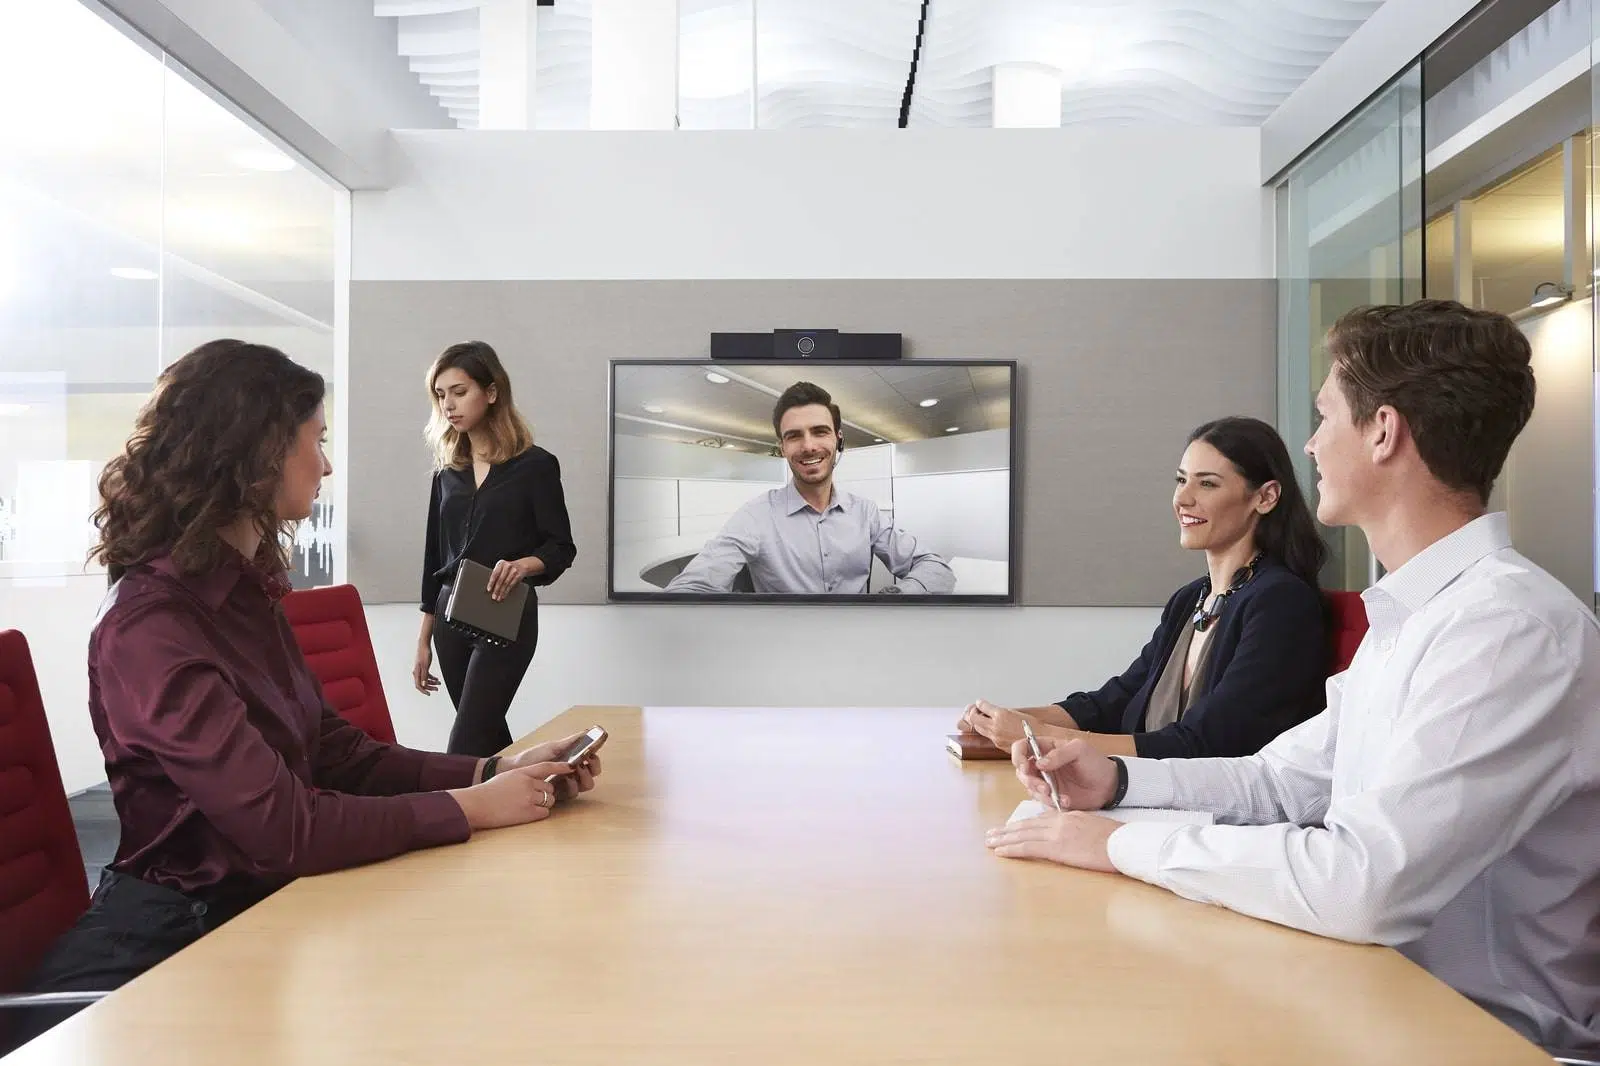 The Polycom Studio is the Ultimate Web Conferencing Solution for Huddle Rooms